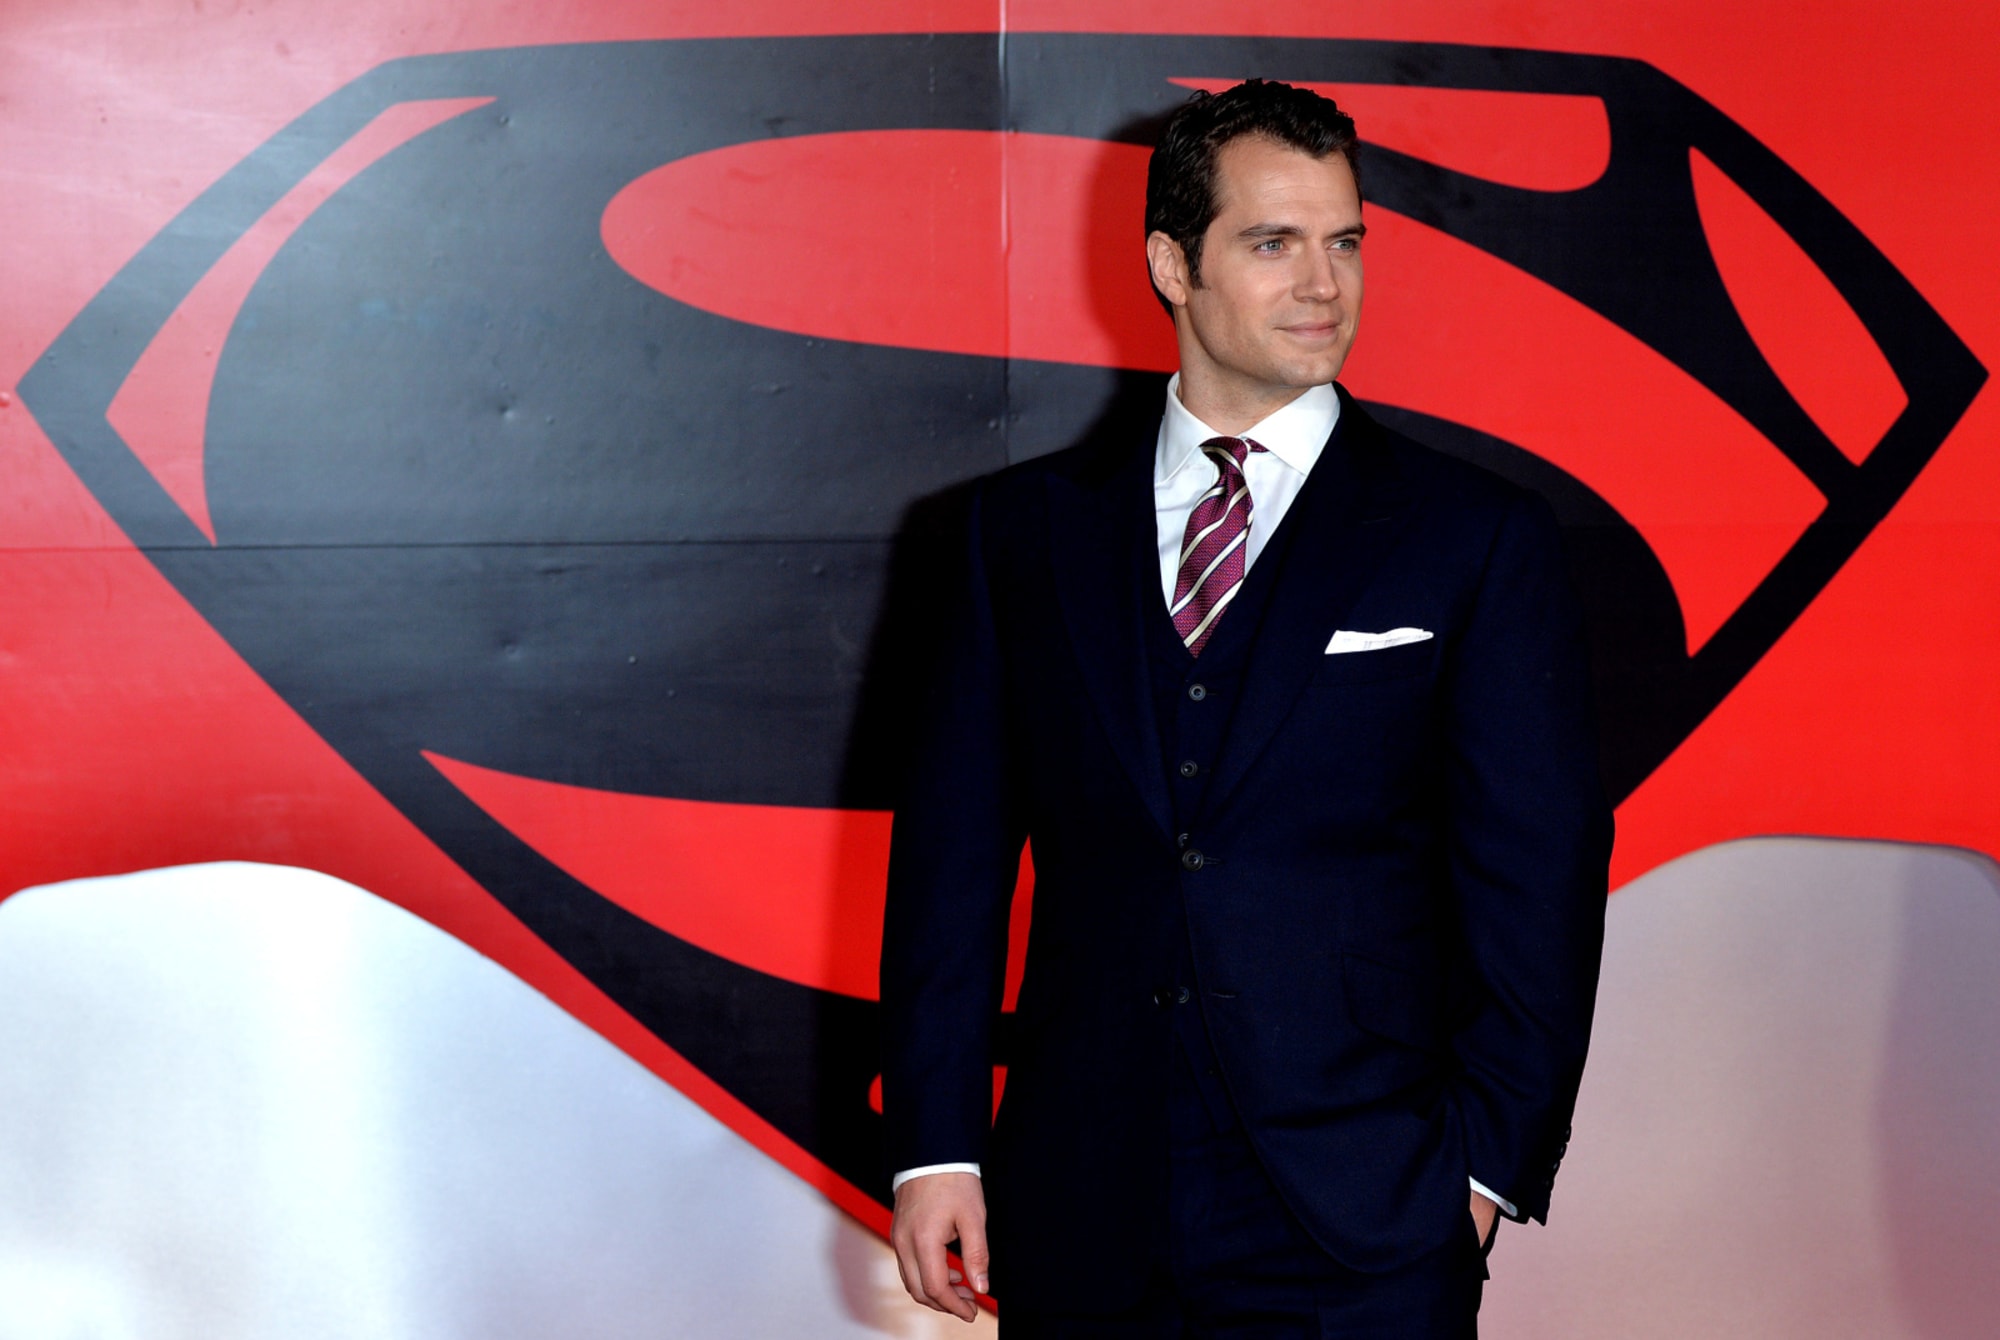 Henry Cavill's Superman cameo cut from The Flash